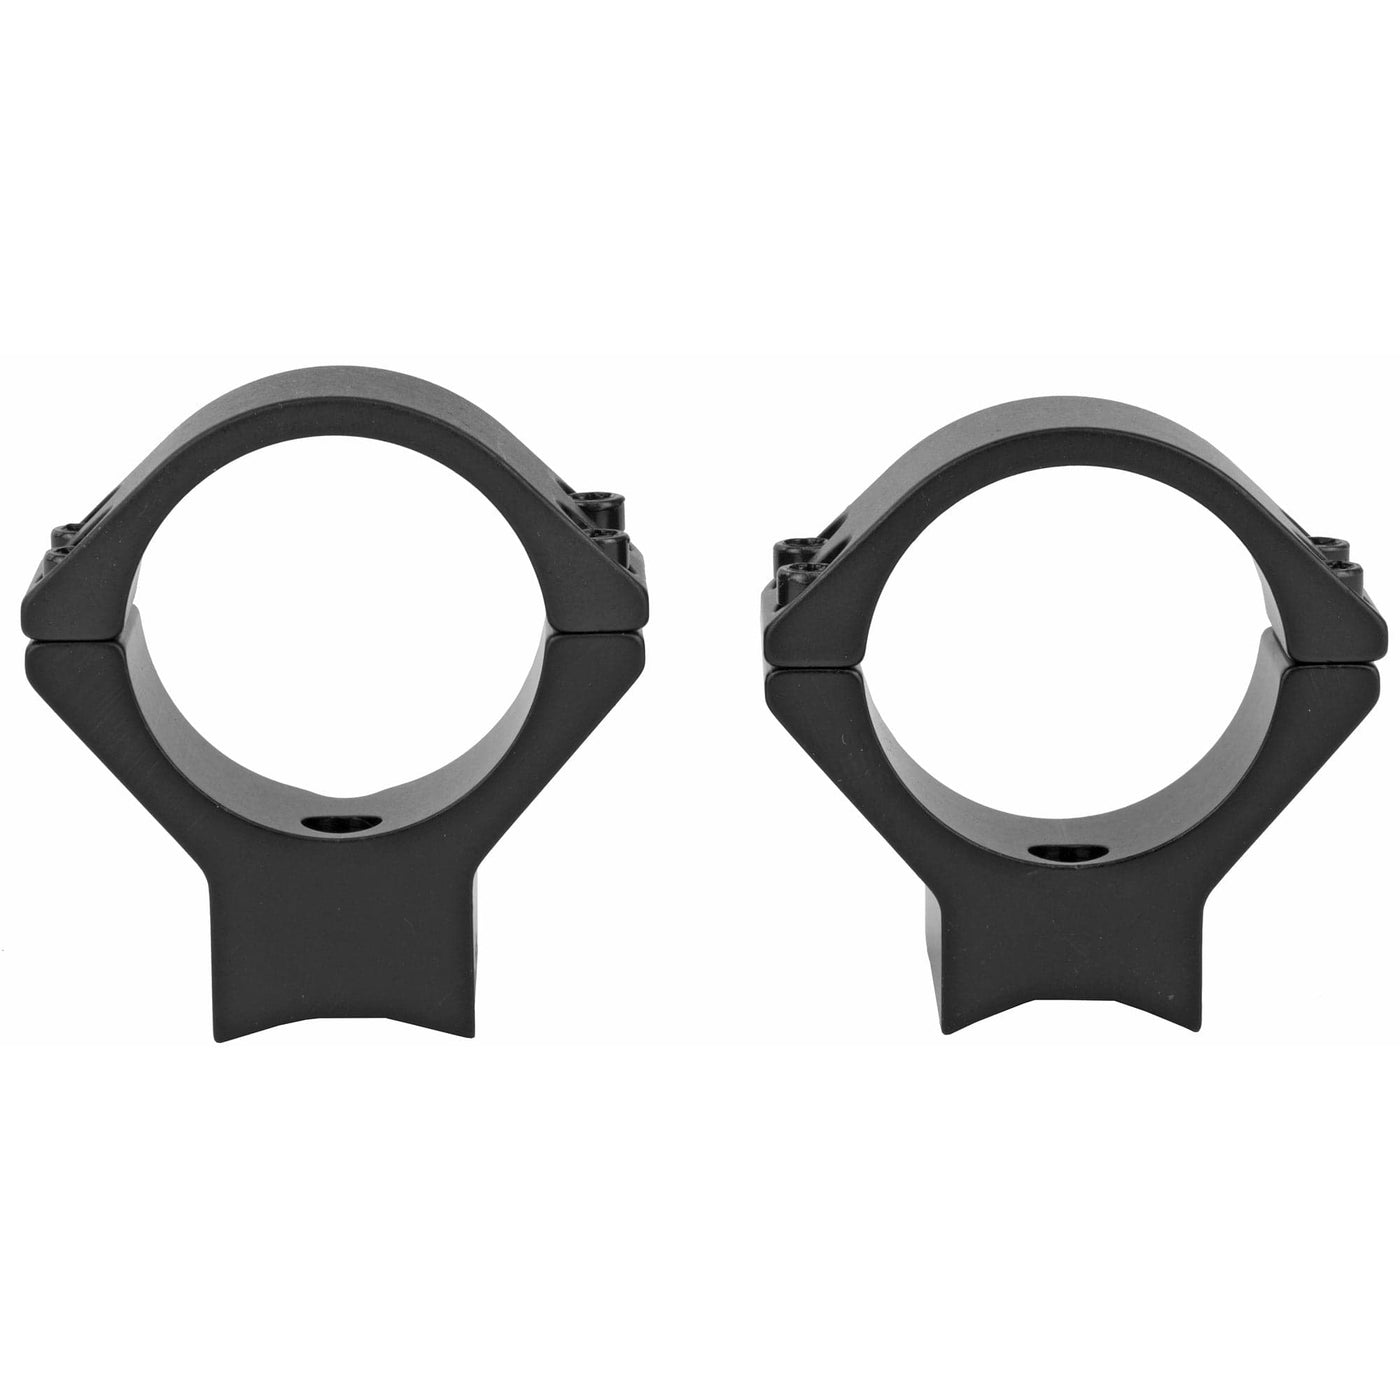 Talley Manufacturing Talley Lw Rings Kimber 8400 30mm Low Scope Mounts